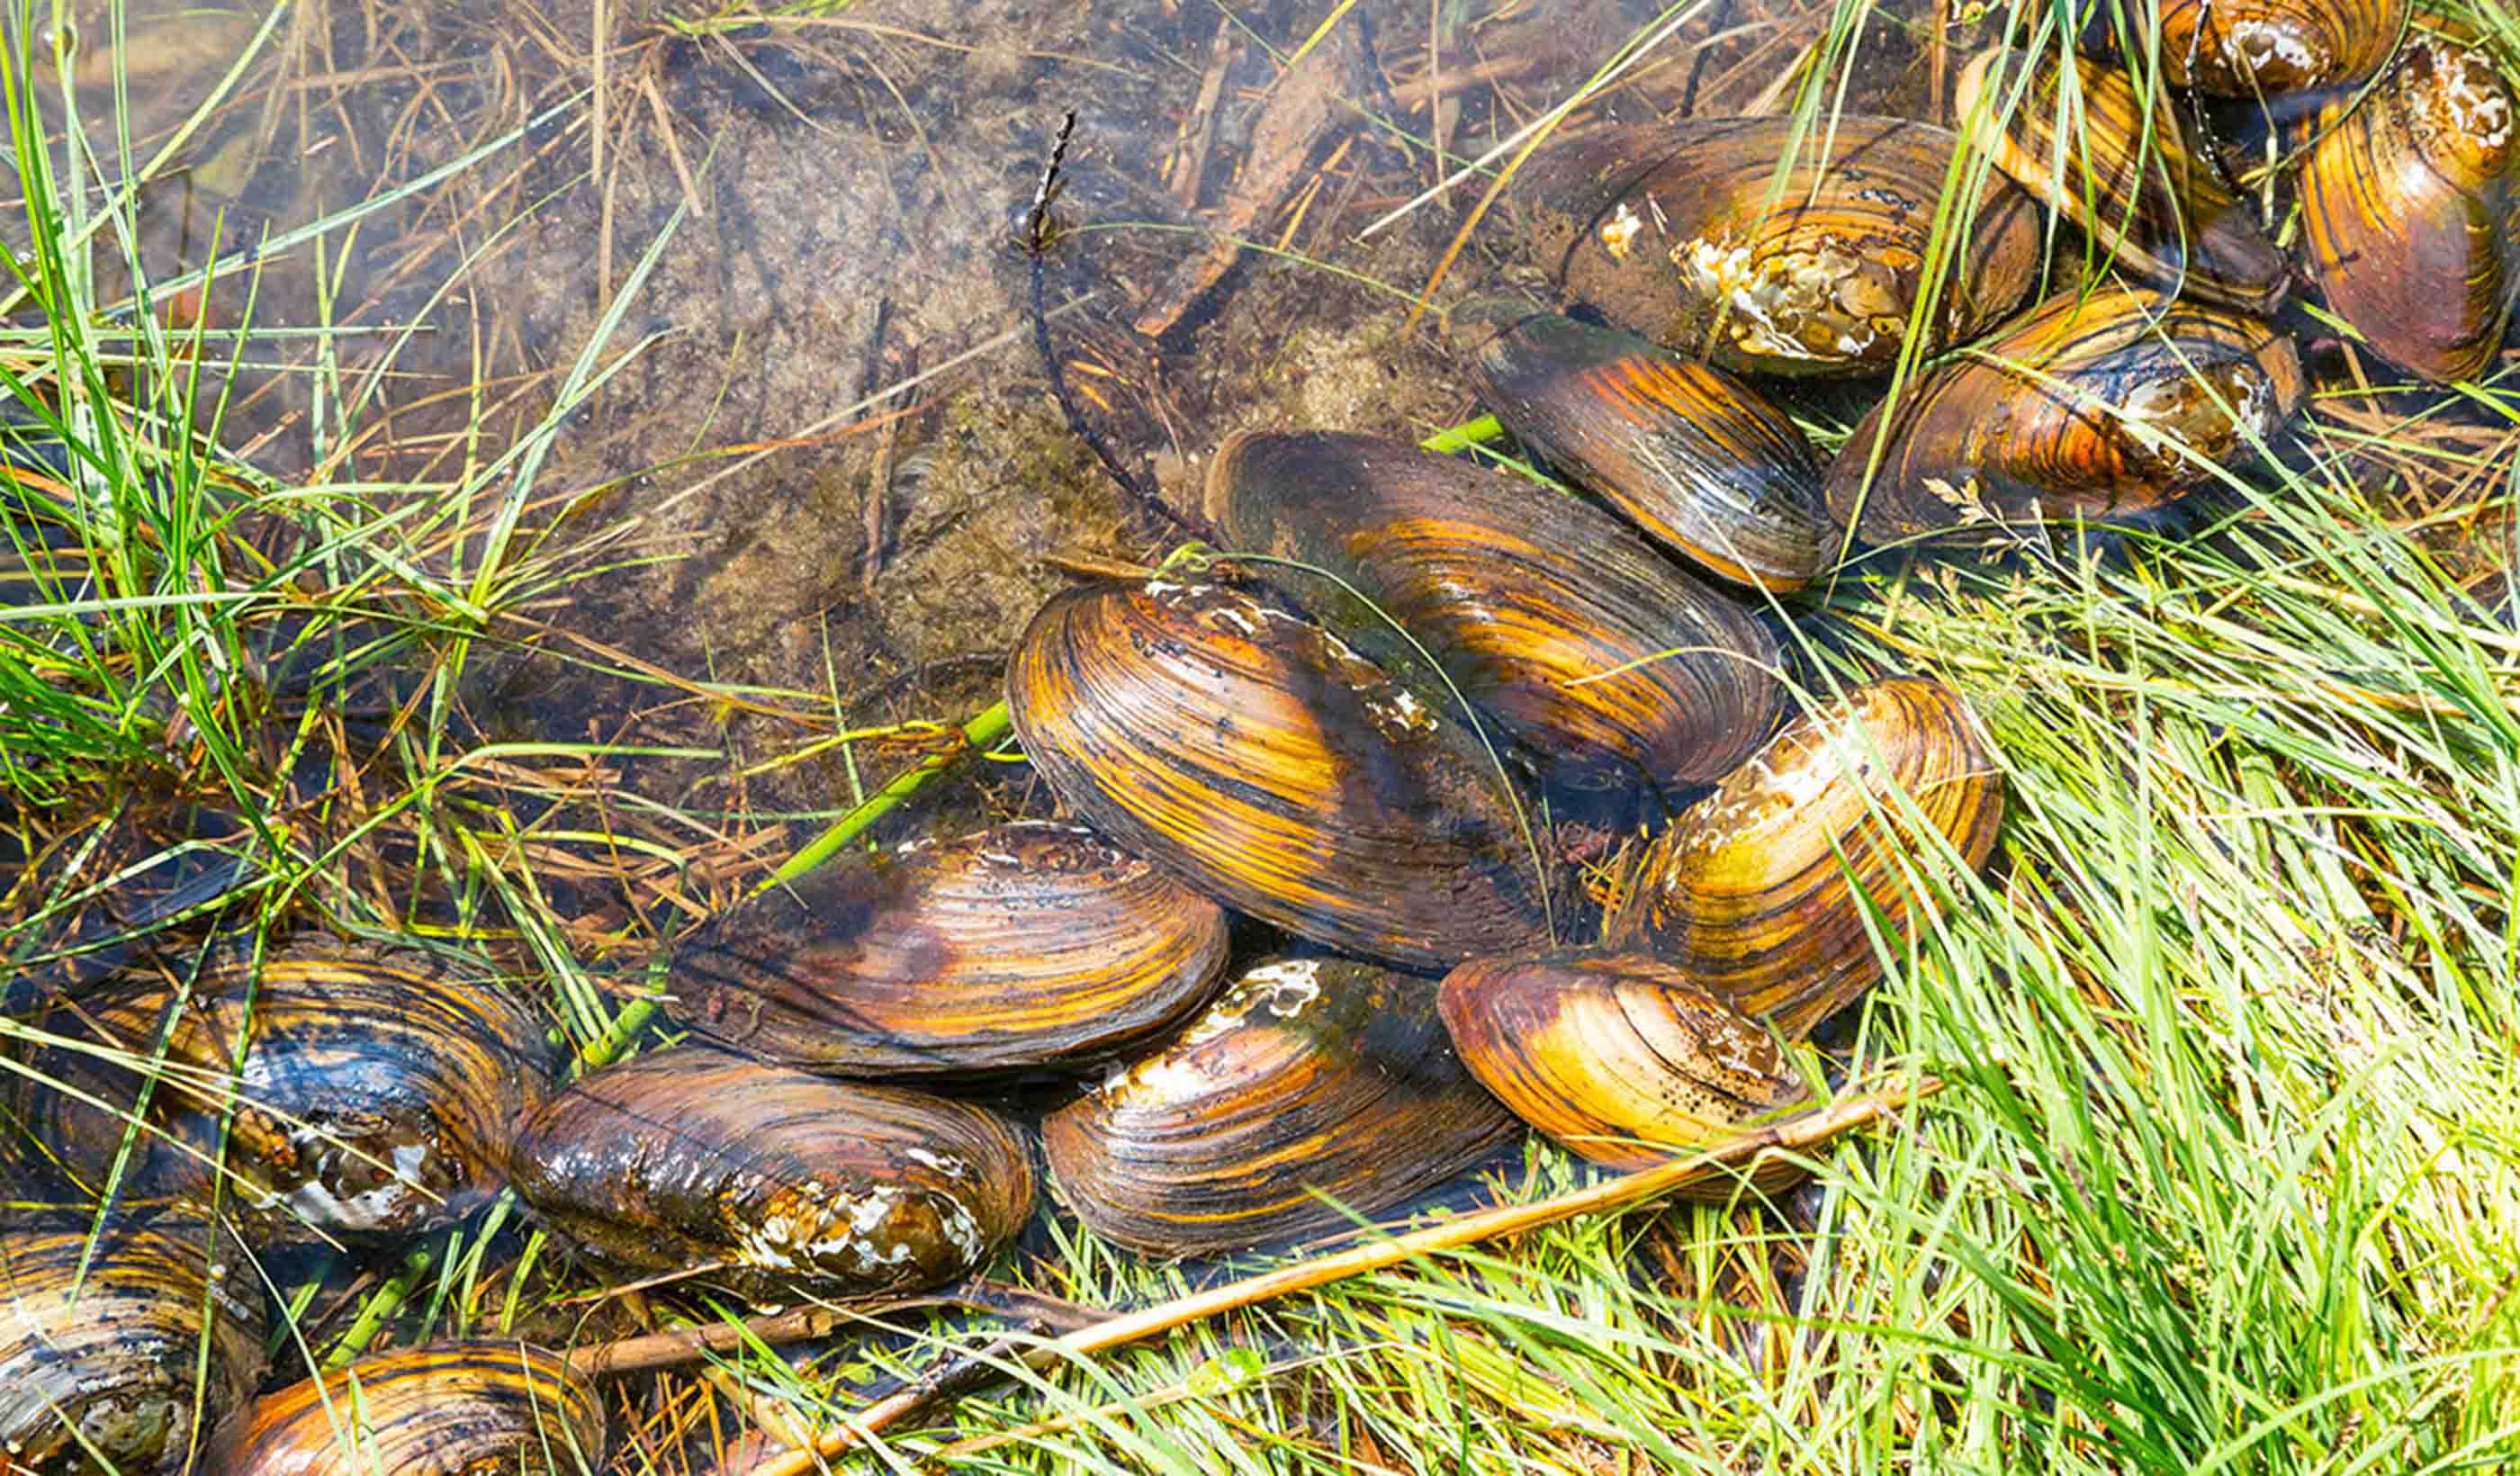 Freshwater mussels 101: Explaining the “aquatic archaeology” behind mussel relocation